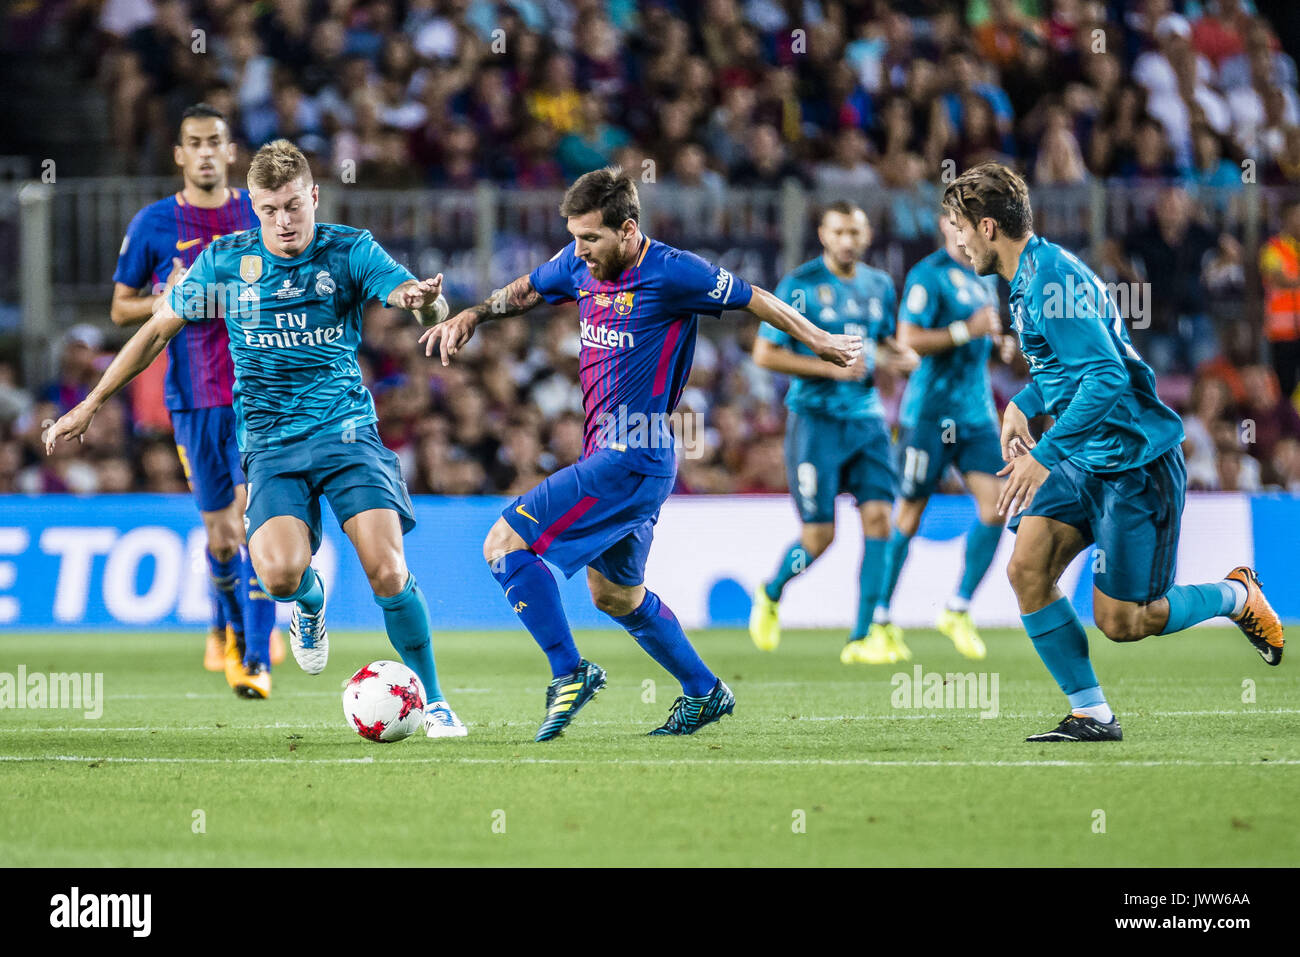 Barcelona, Catalonia, Spain. 13th Aug, 2017. FC Barcelona forward MESSI competes with Real Madrid midfielder KROOS for the ball during the Spanish Super Cup Final 1st leg between FC Barcelona and Real Madrid at the Camp Nou stadium in Barcelona Credit: Matthias Oesterle/ZUMA Wire/Alamy Live News Stock Photo